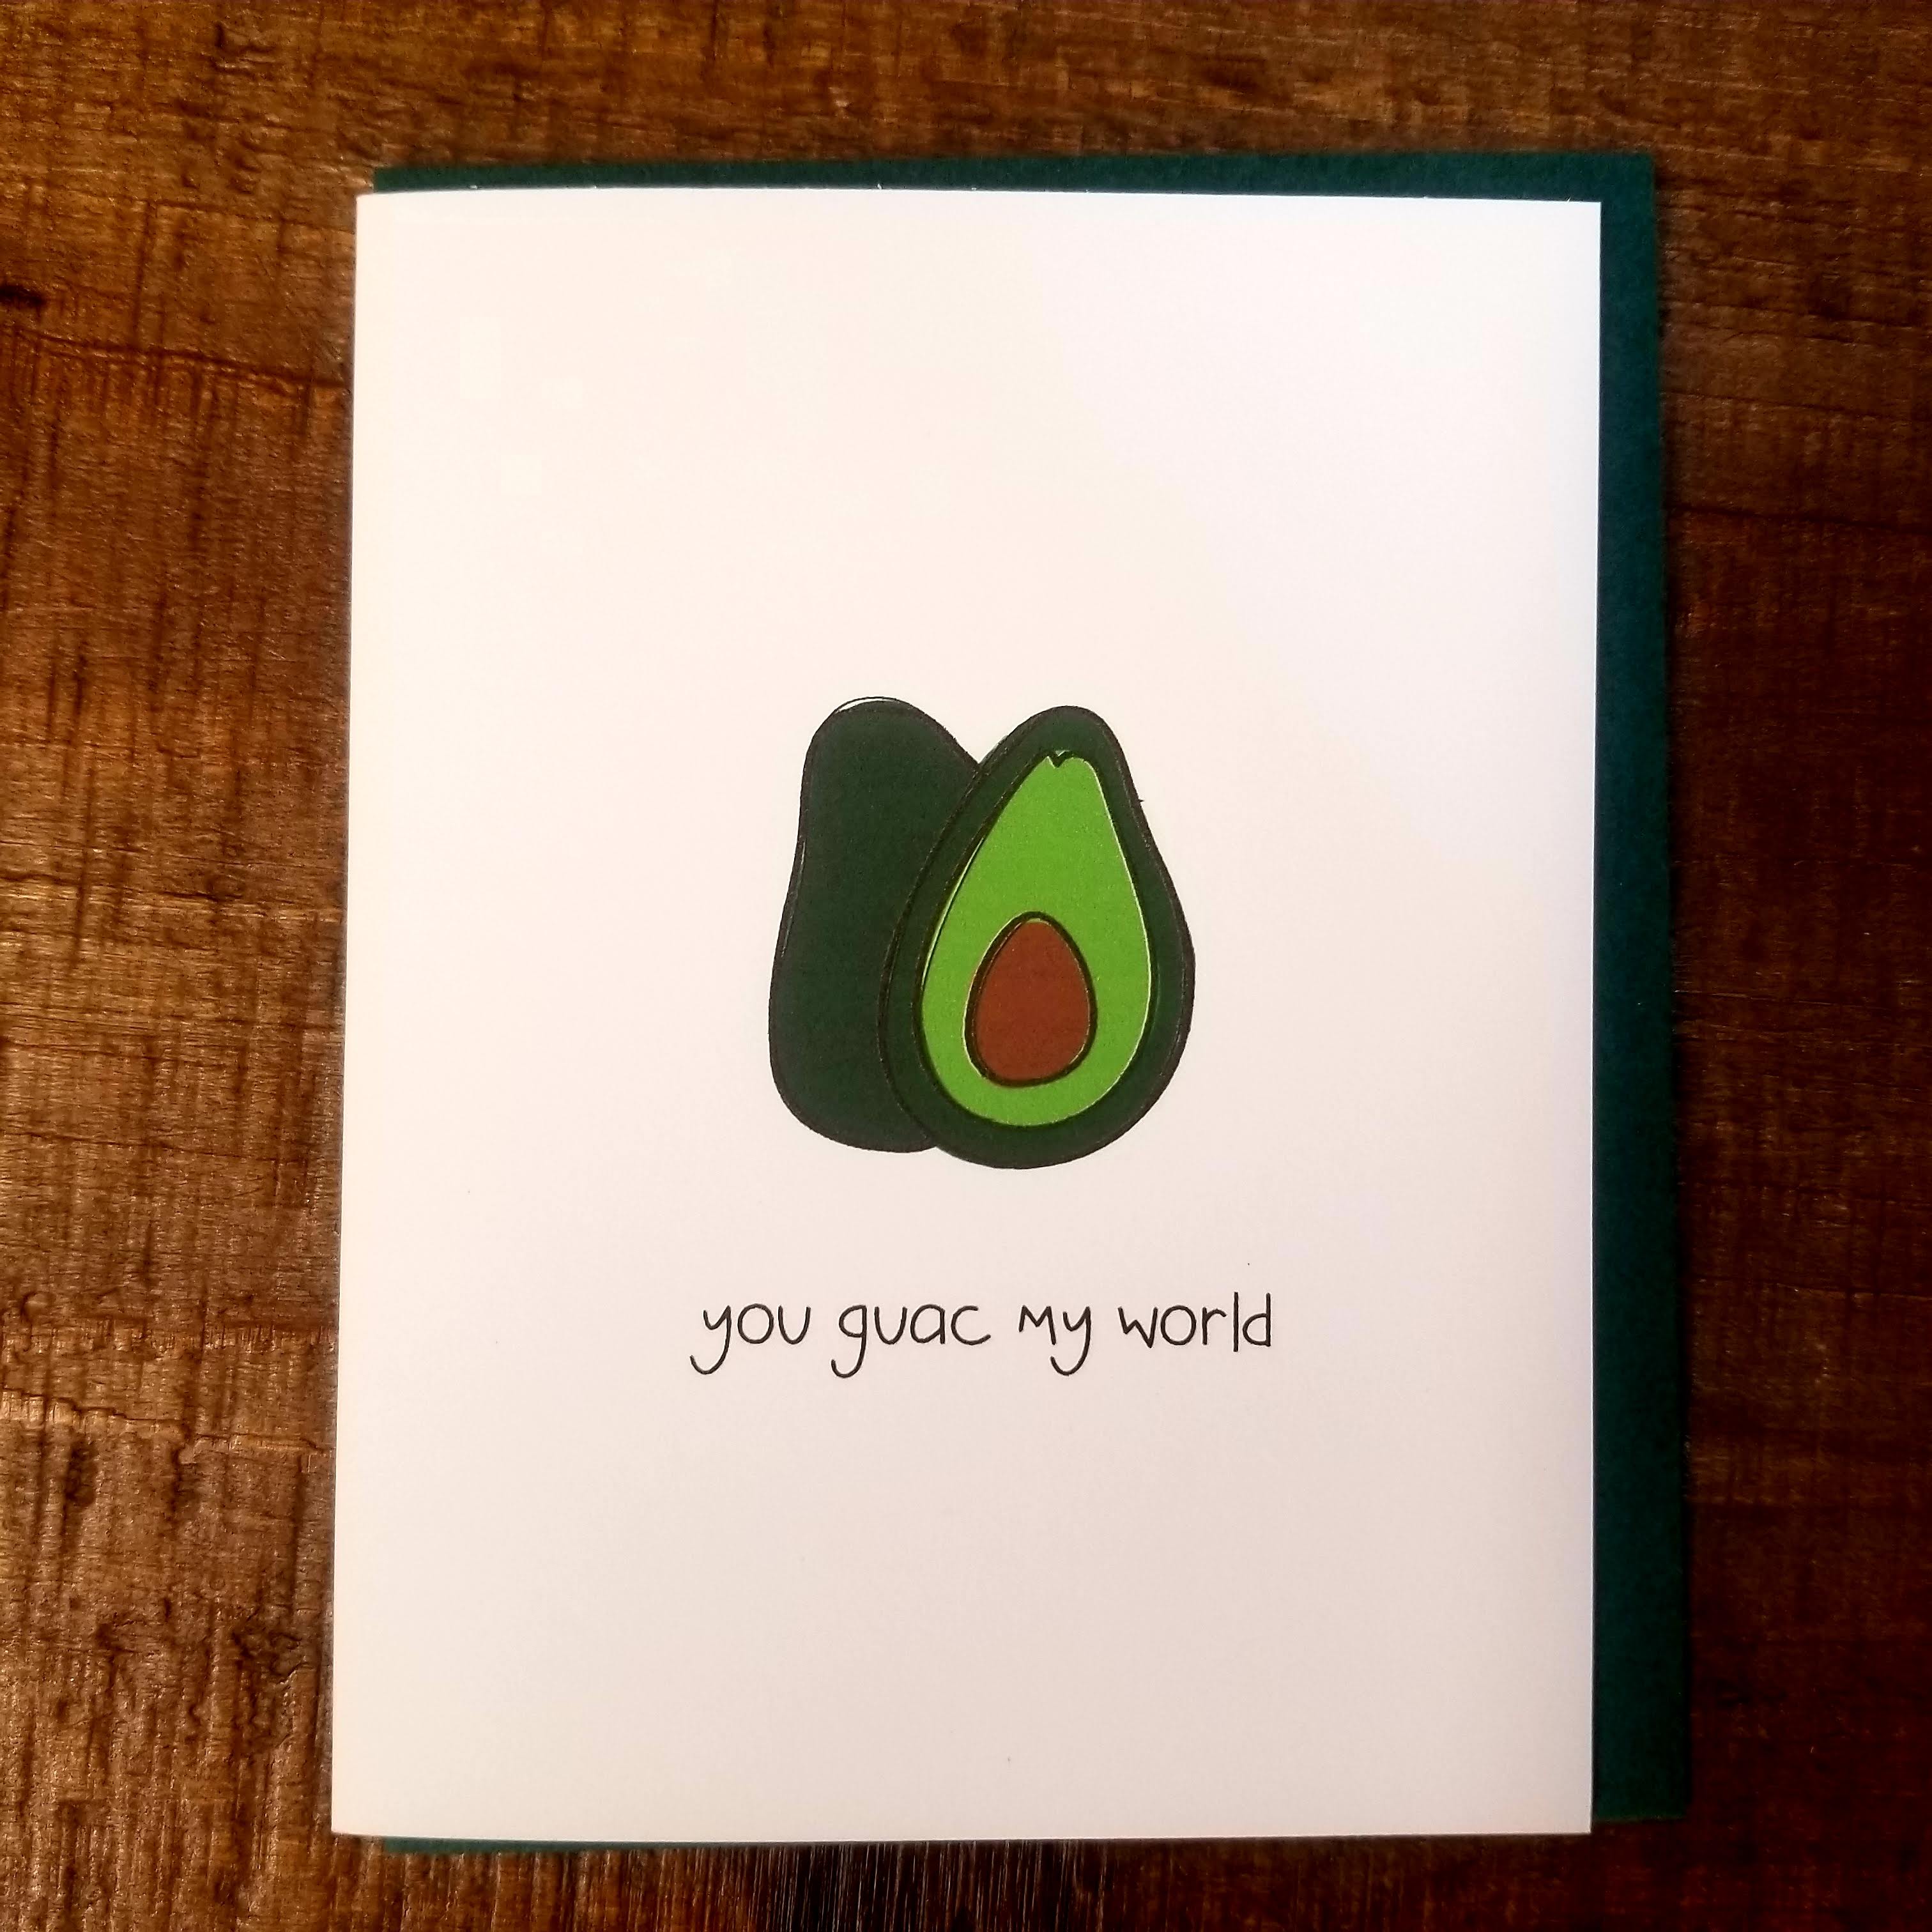 Modern Quill Greeting Cards - The Mockingbird Apothecary & General Store